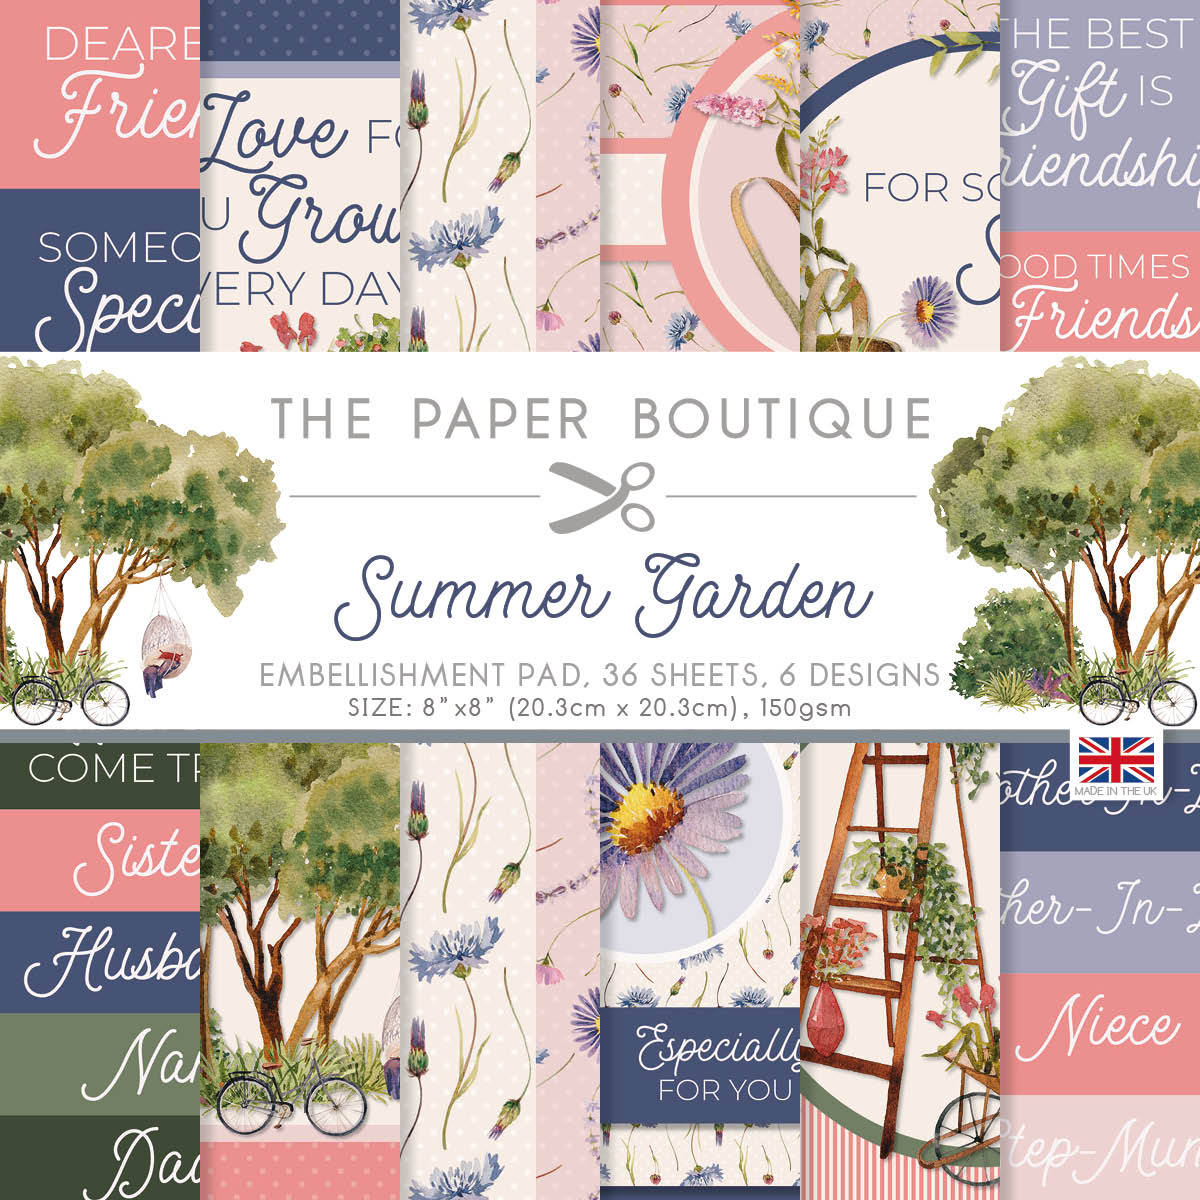 The Paper Boutique Summer Garden 8 in x 8 in Embellishments Pad